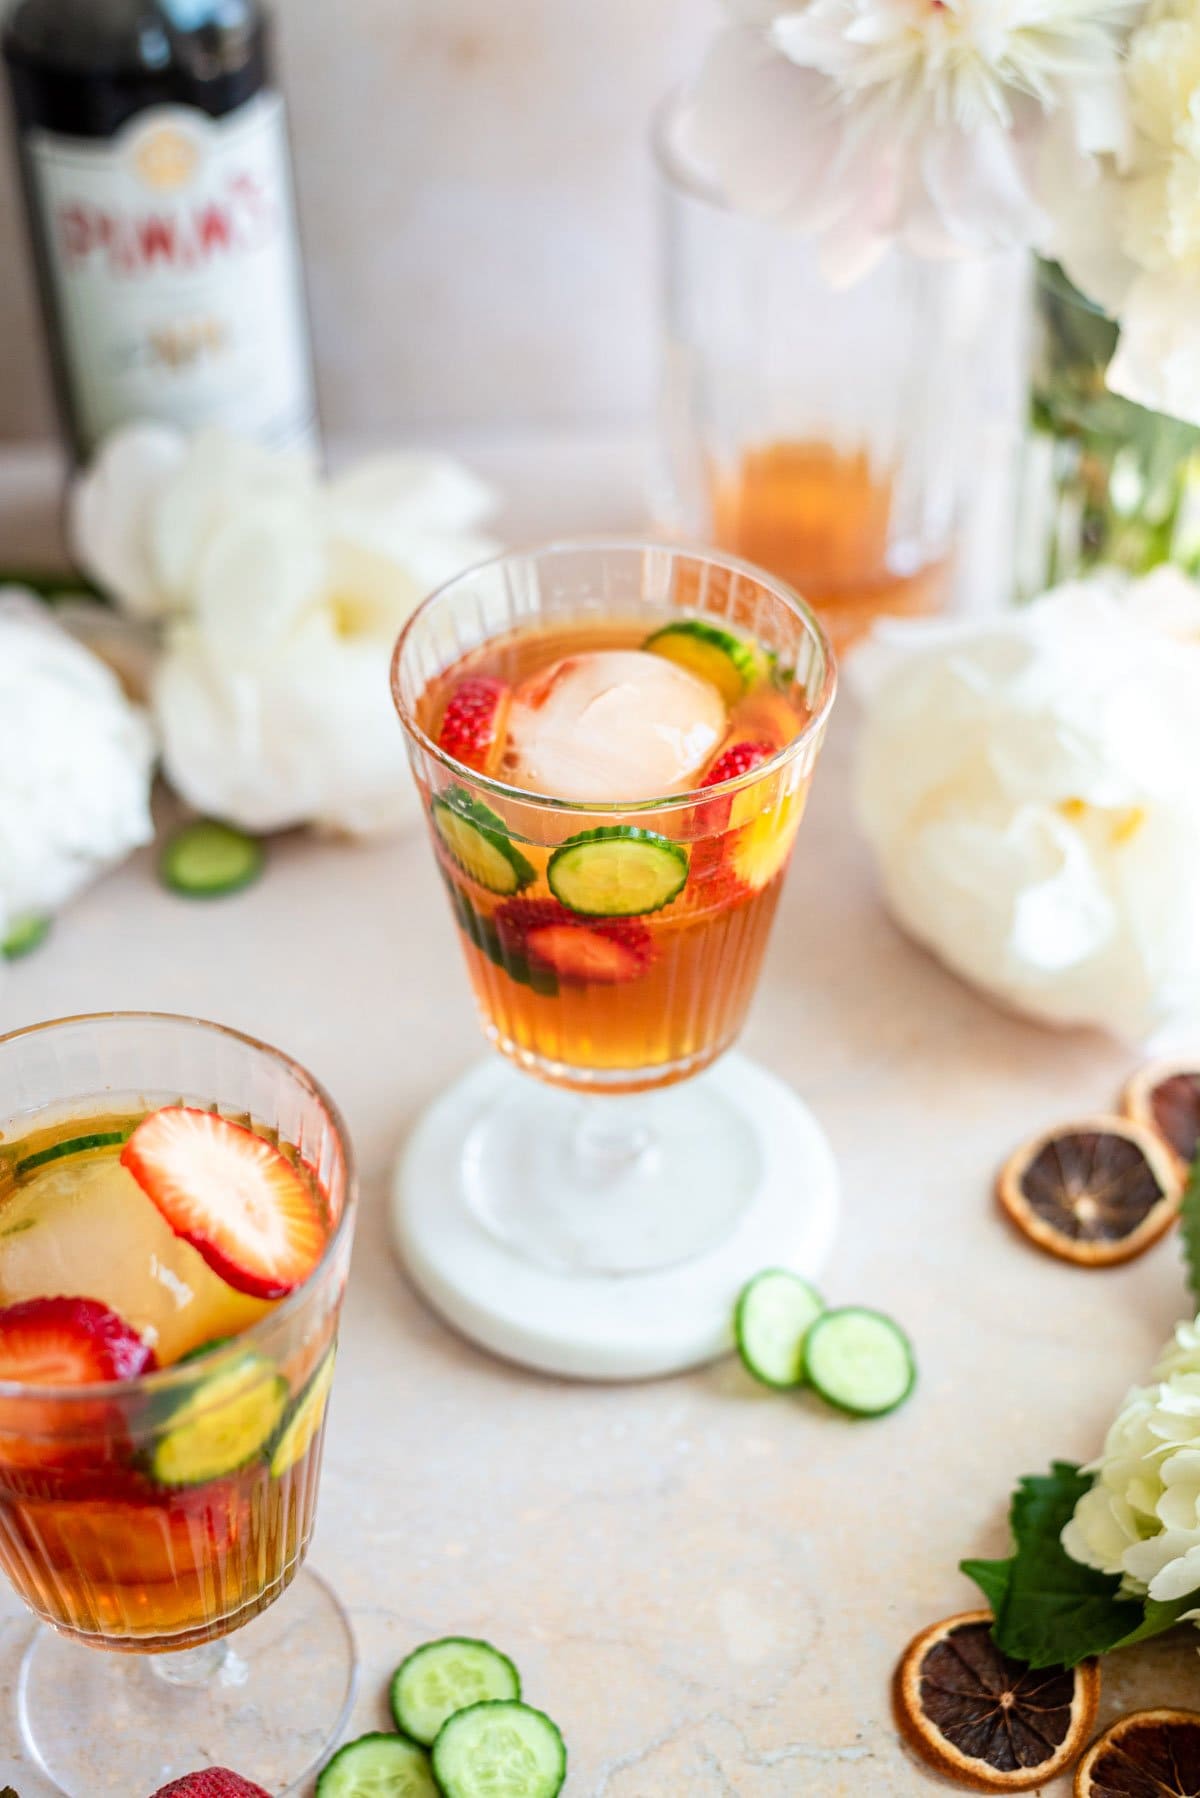 Overhead angle shot of two glasses of Pimm's Cups on a brown table surrounded by flowers